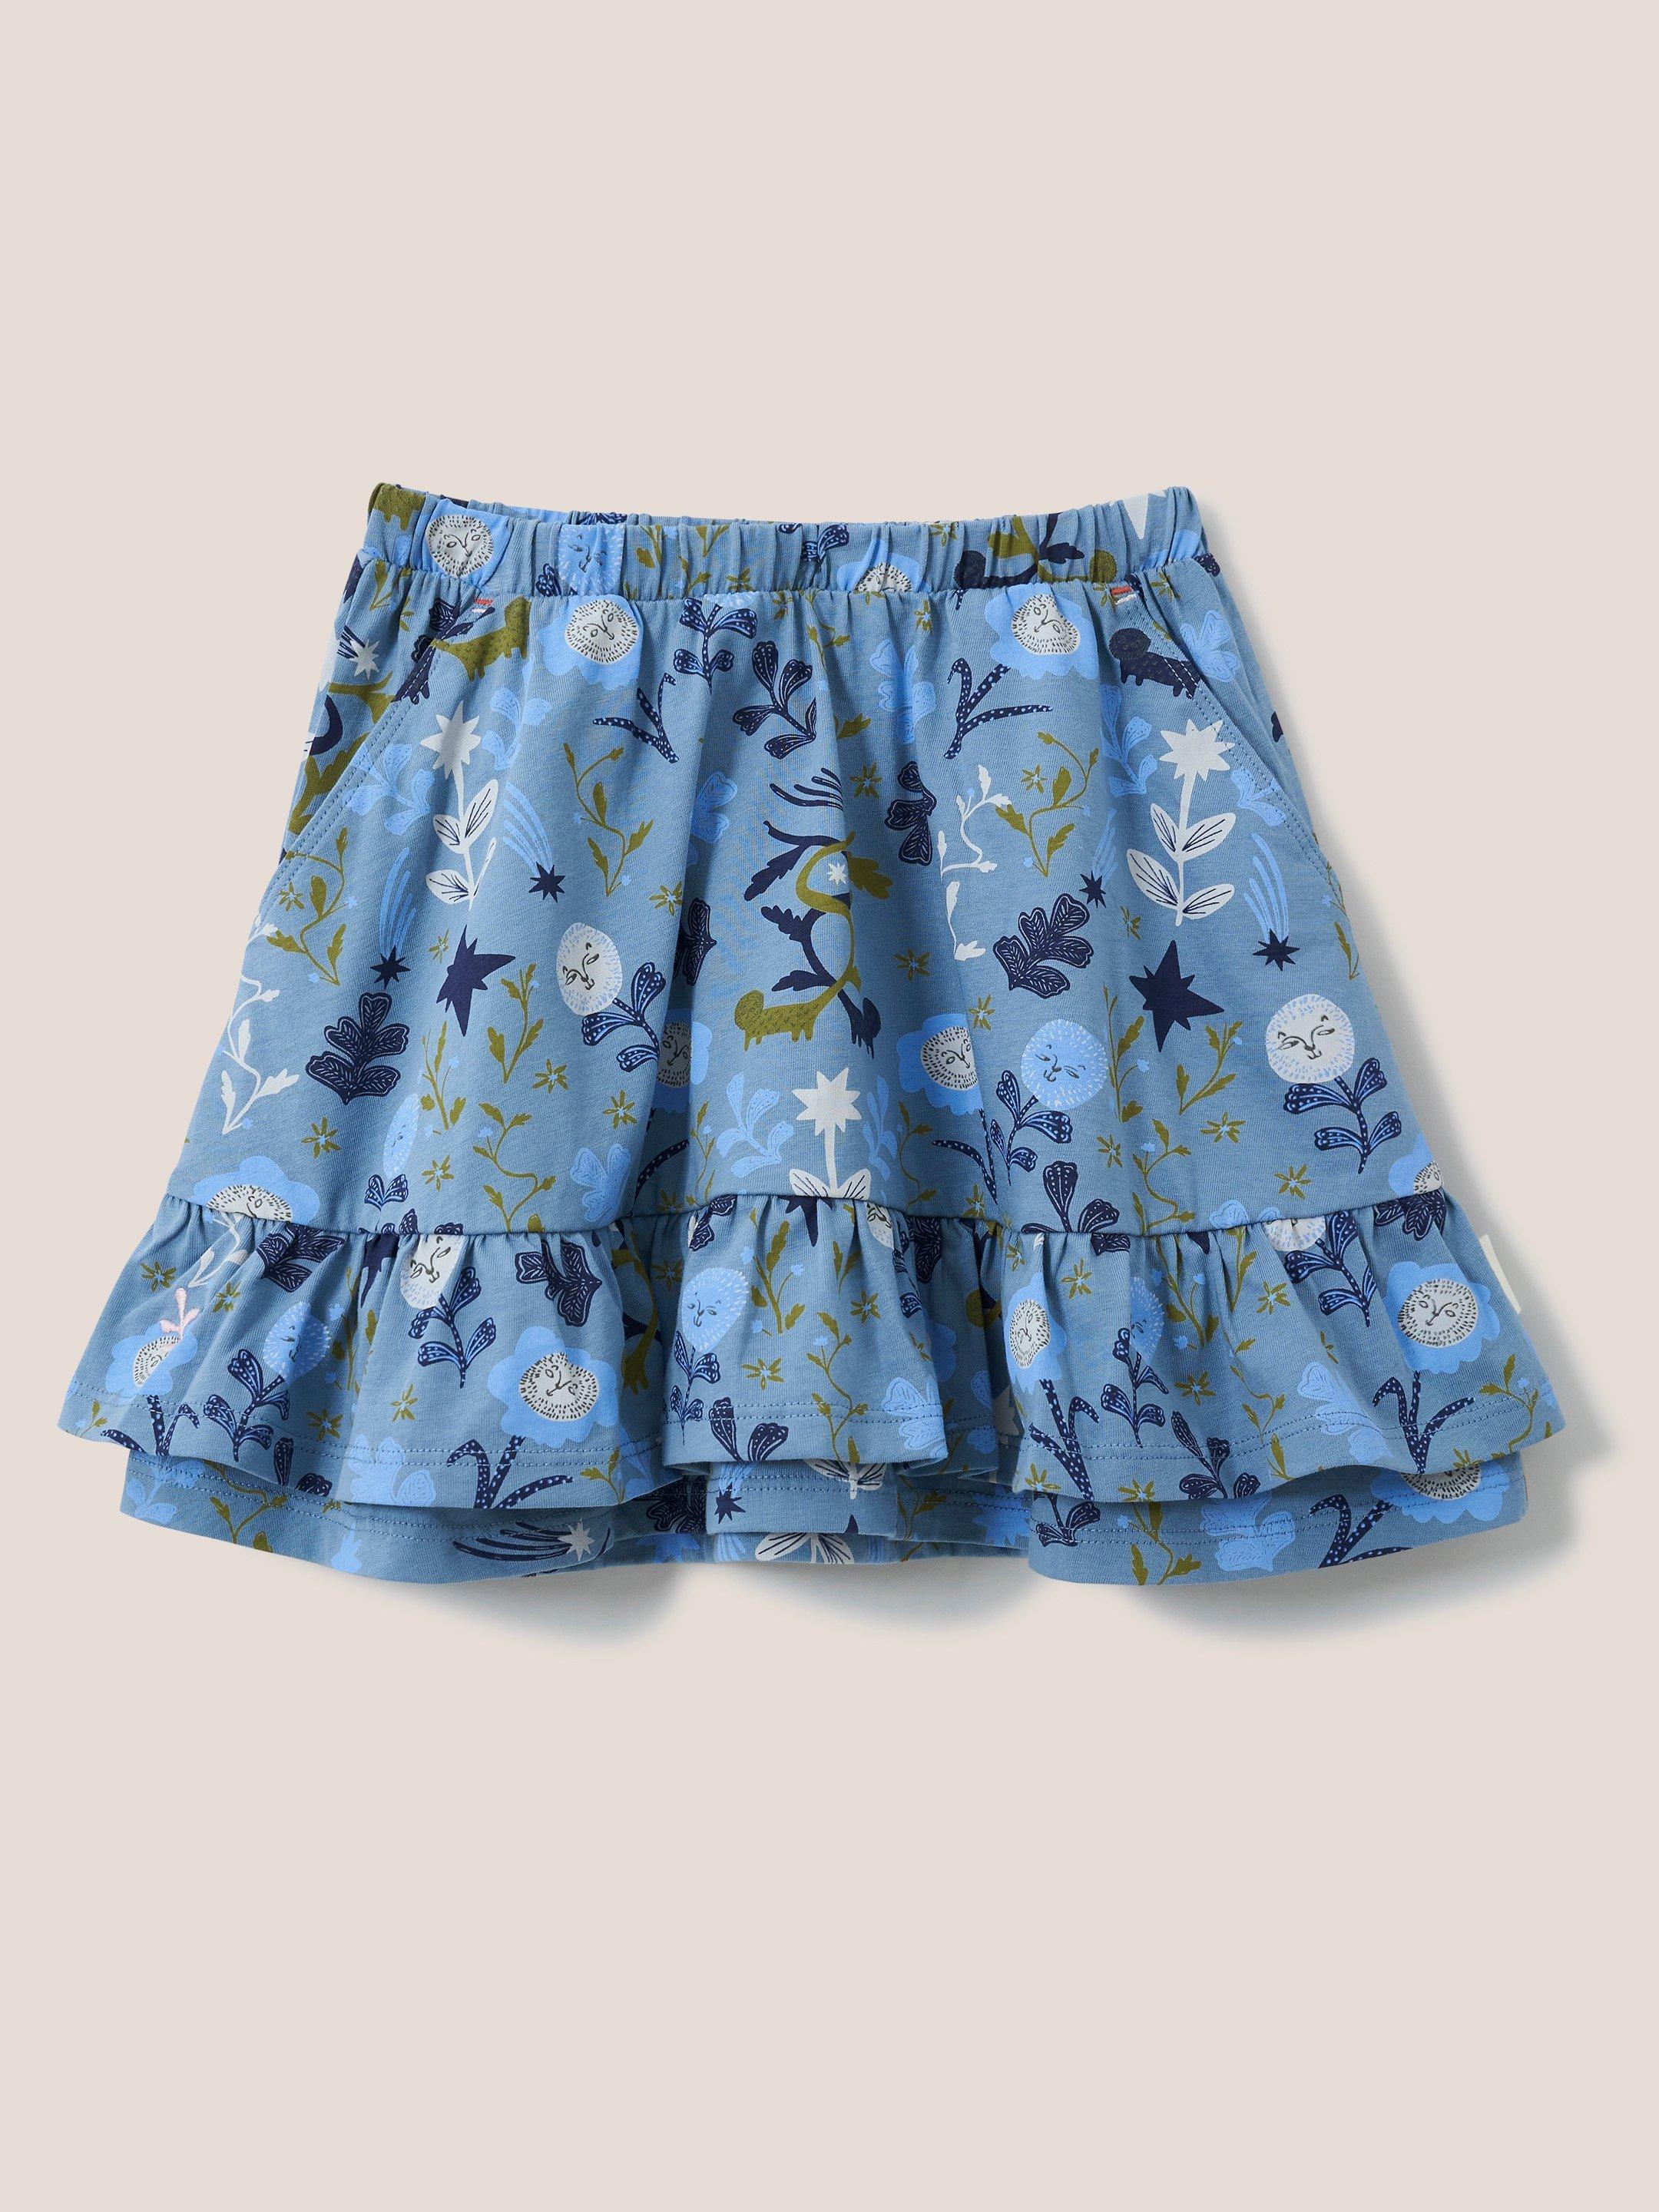 Sia Jersey Print Skirt in BLUE MLT - FLAT FRONT